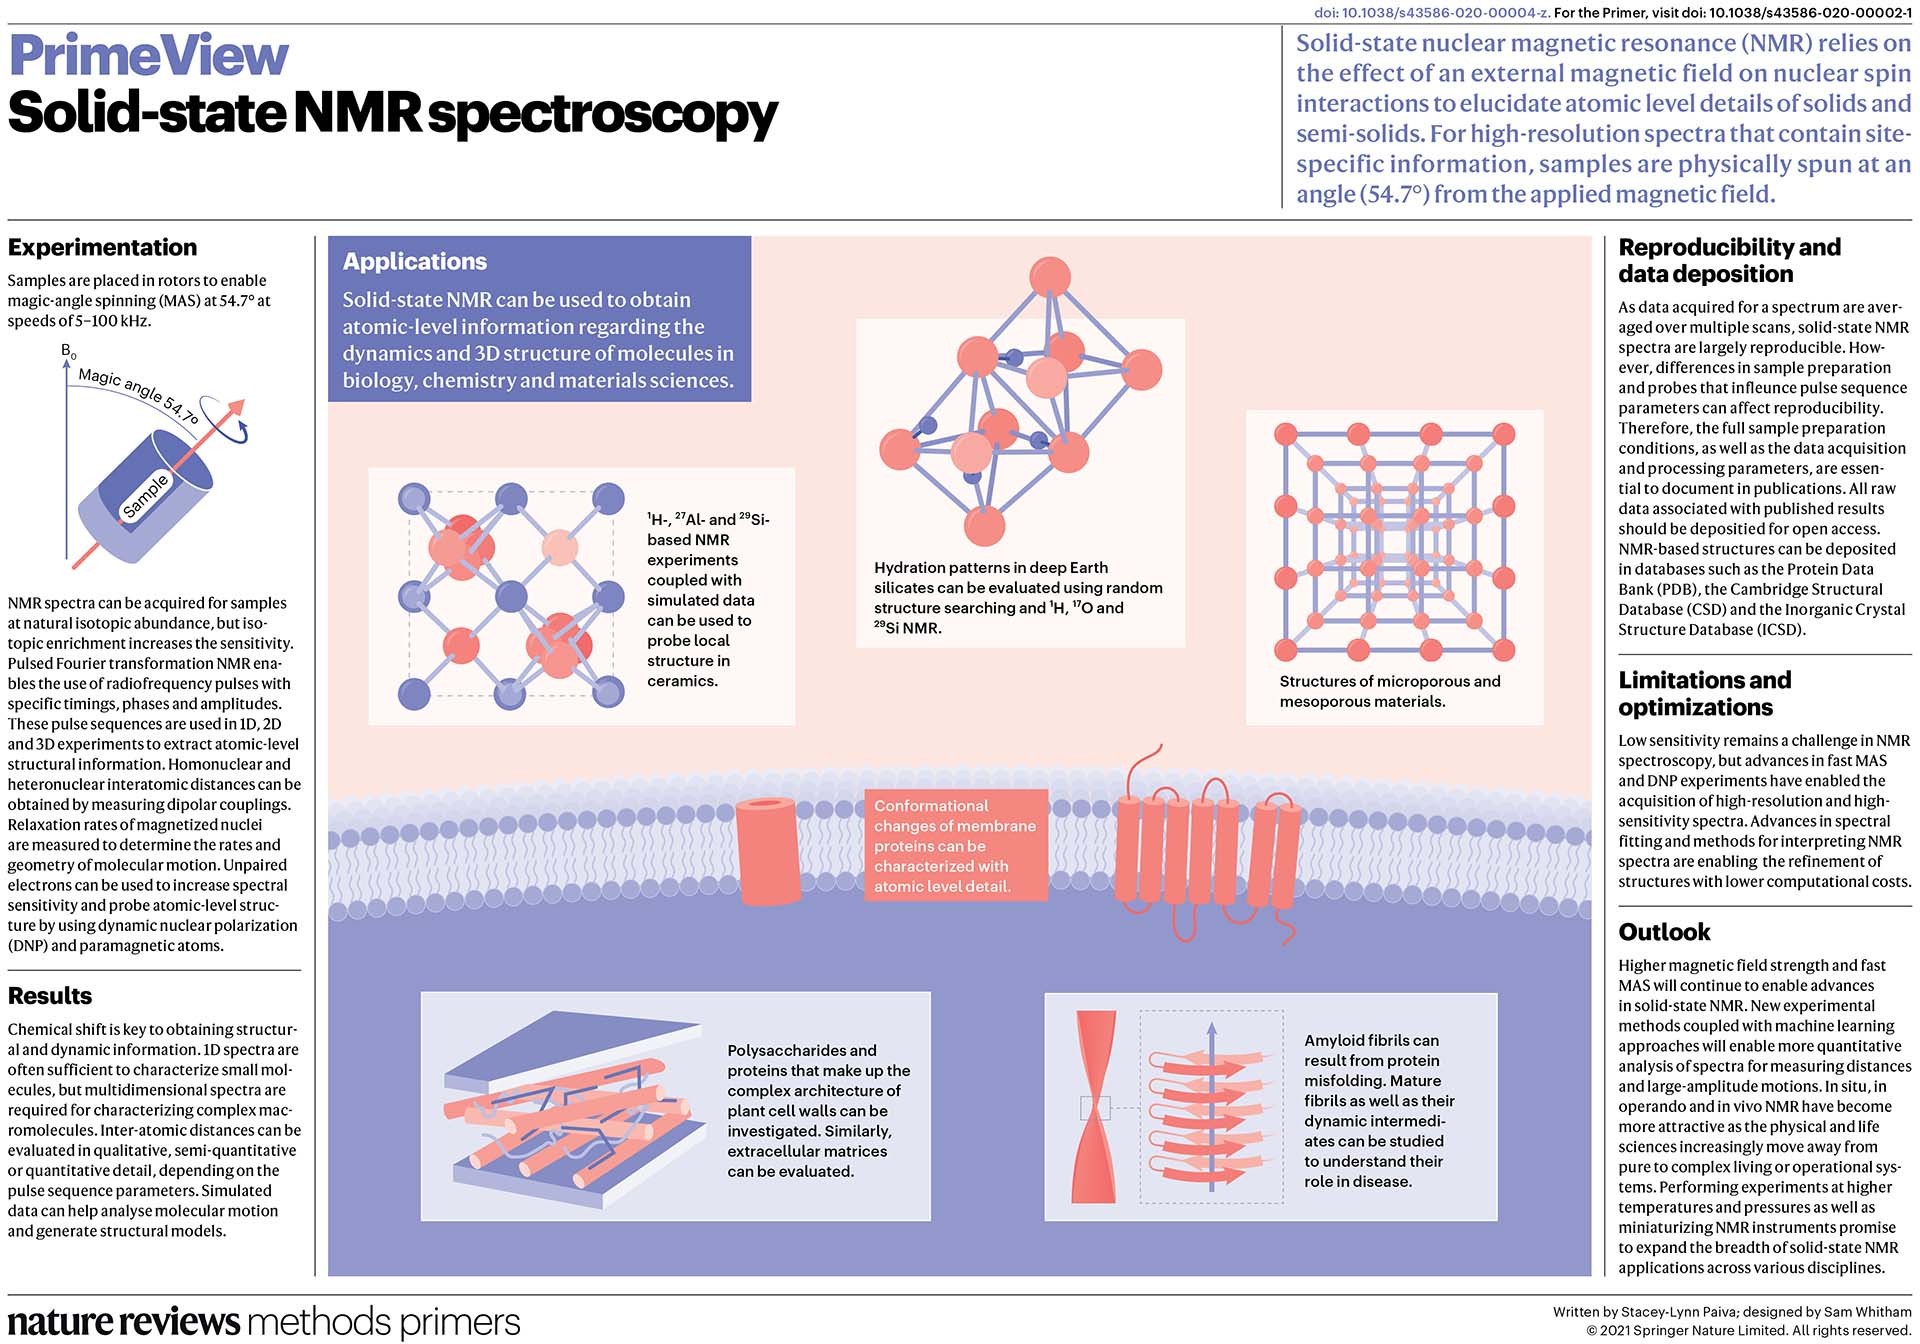 Solid-state NMR spectroscopy | Nature Reviews Methods Primers